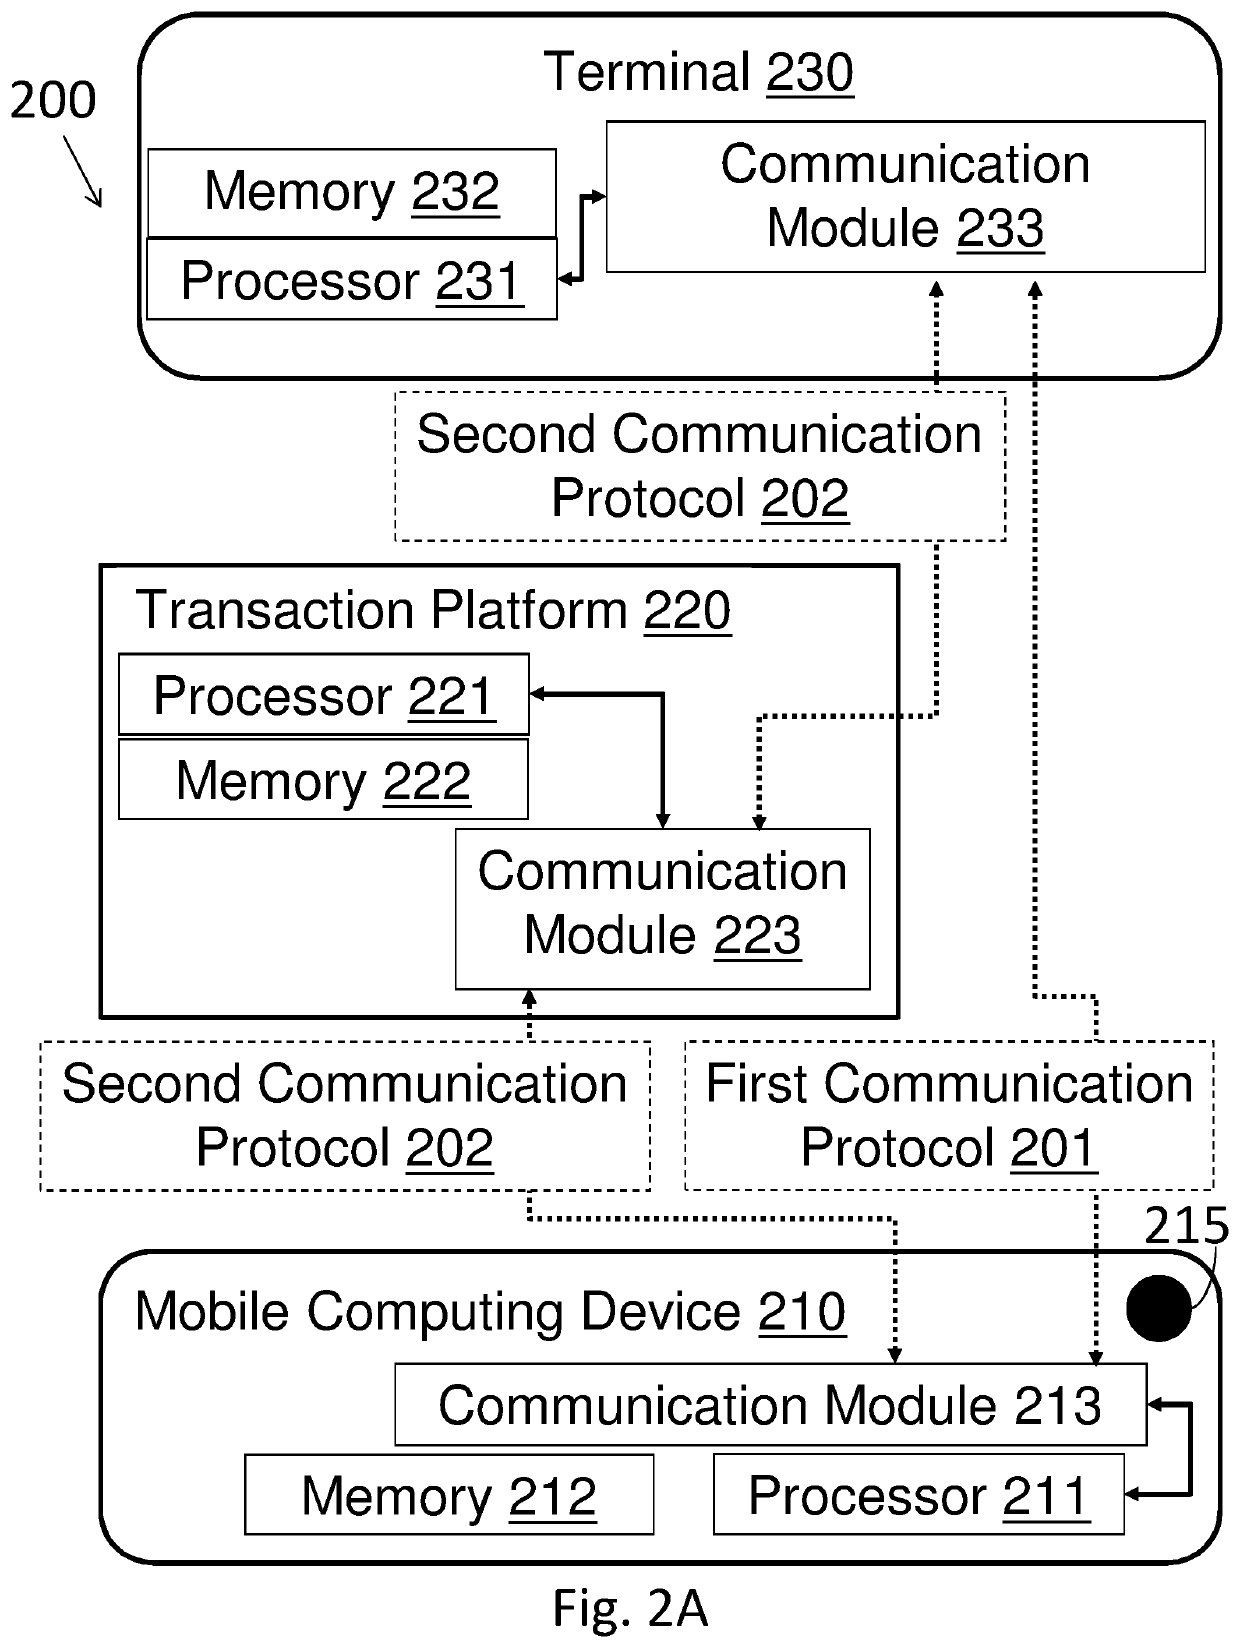 System and method for performing cashless transactions between computing devices